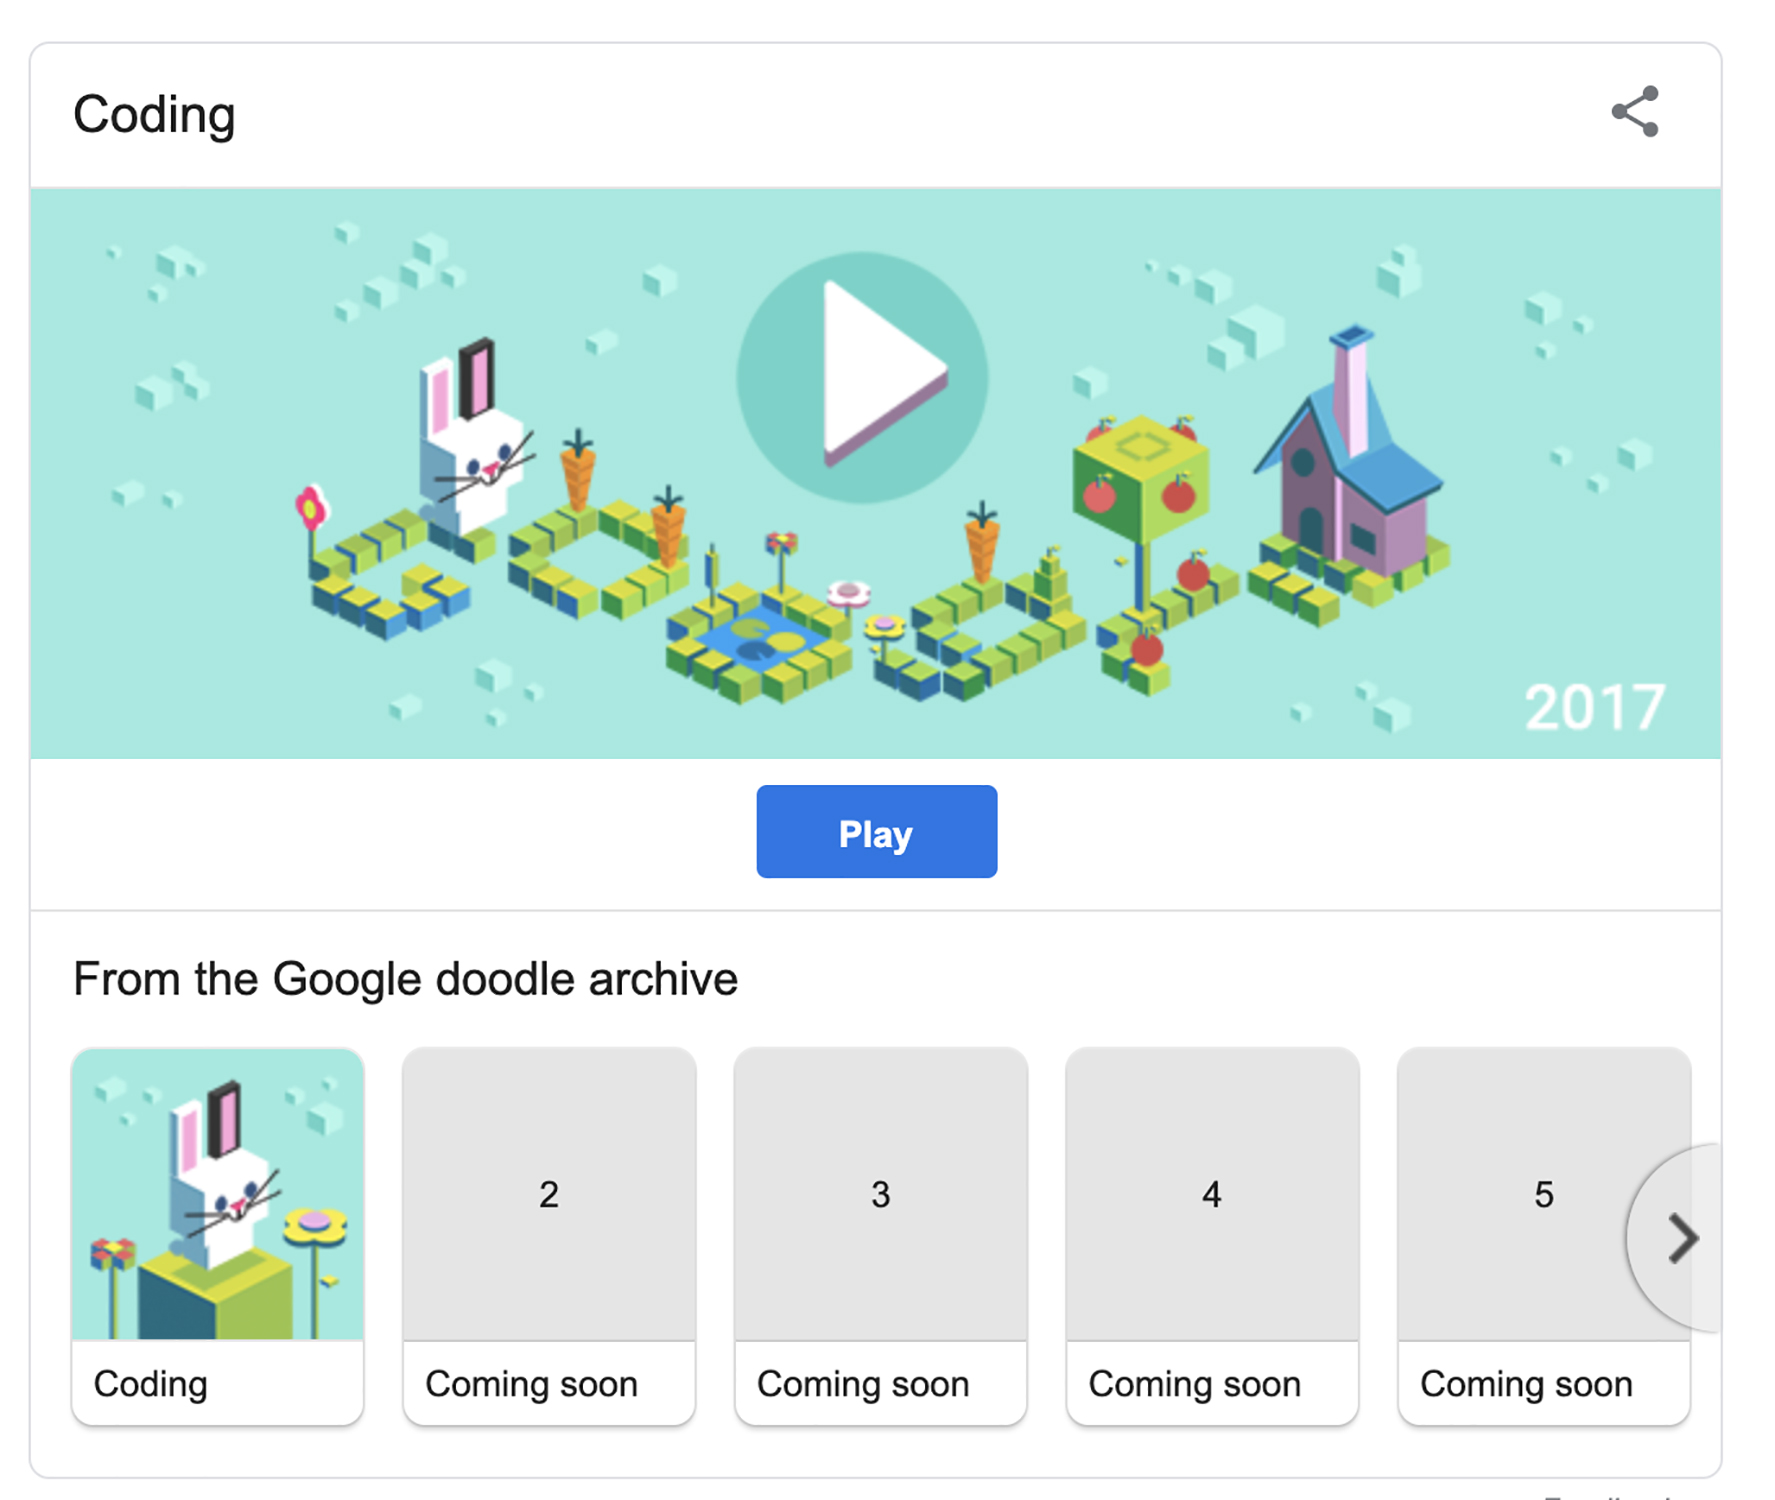 Google is bringing back a popular Doodle game every day